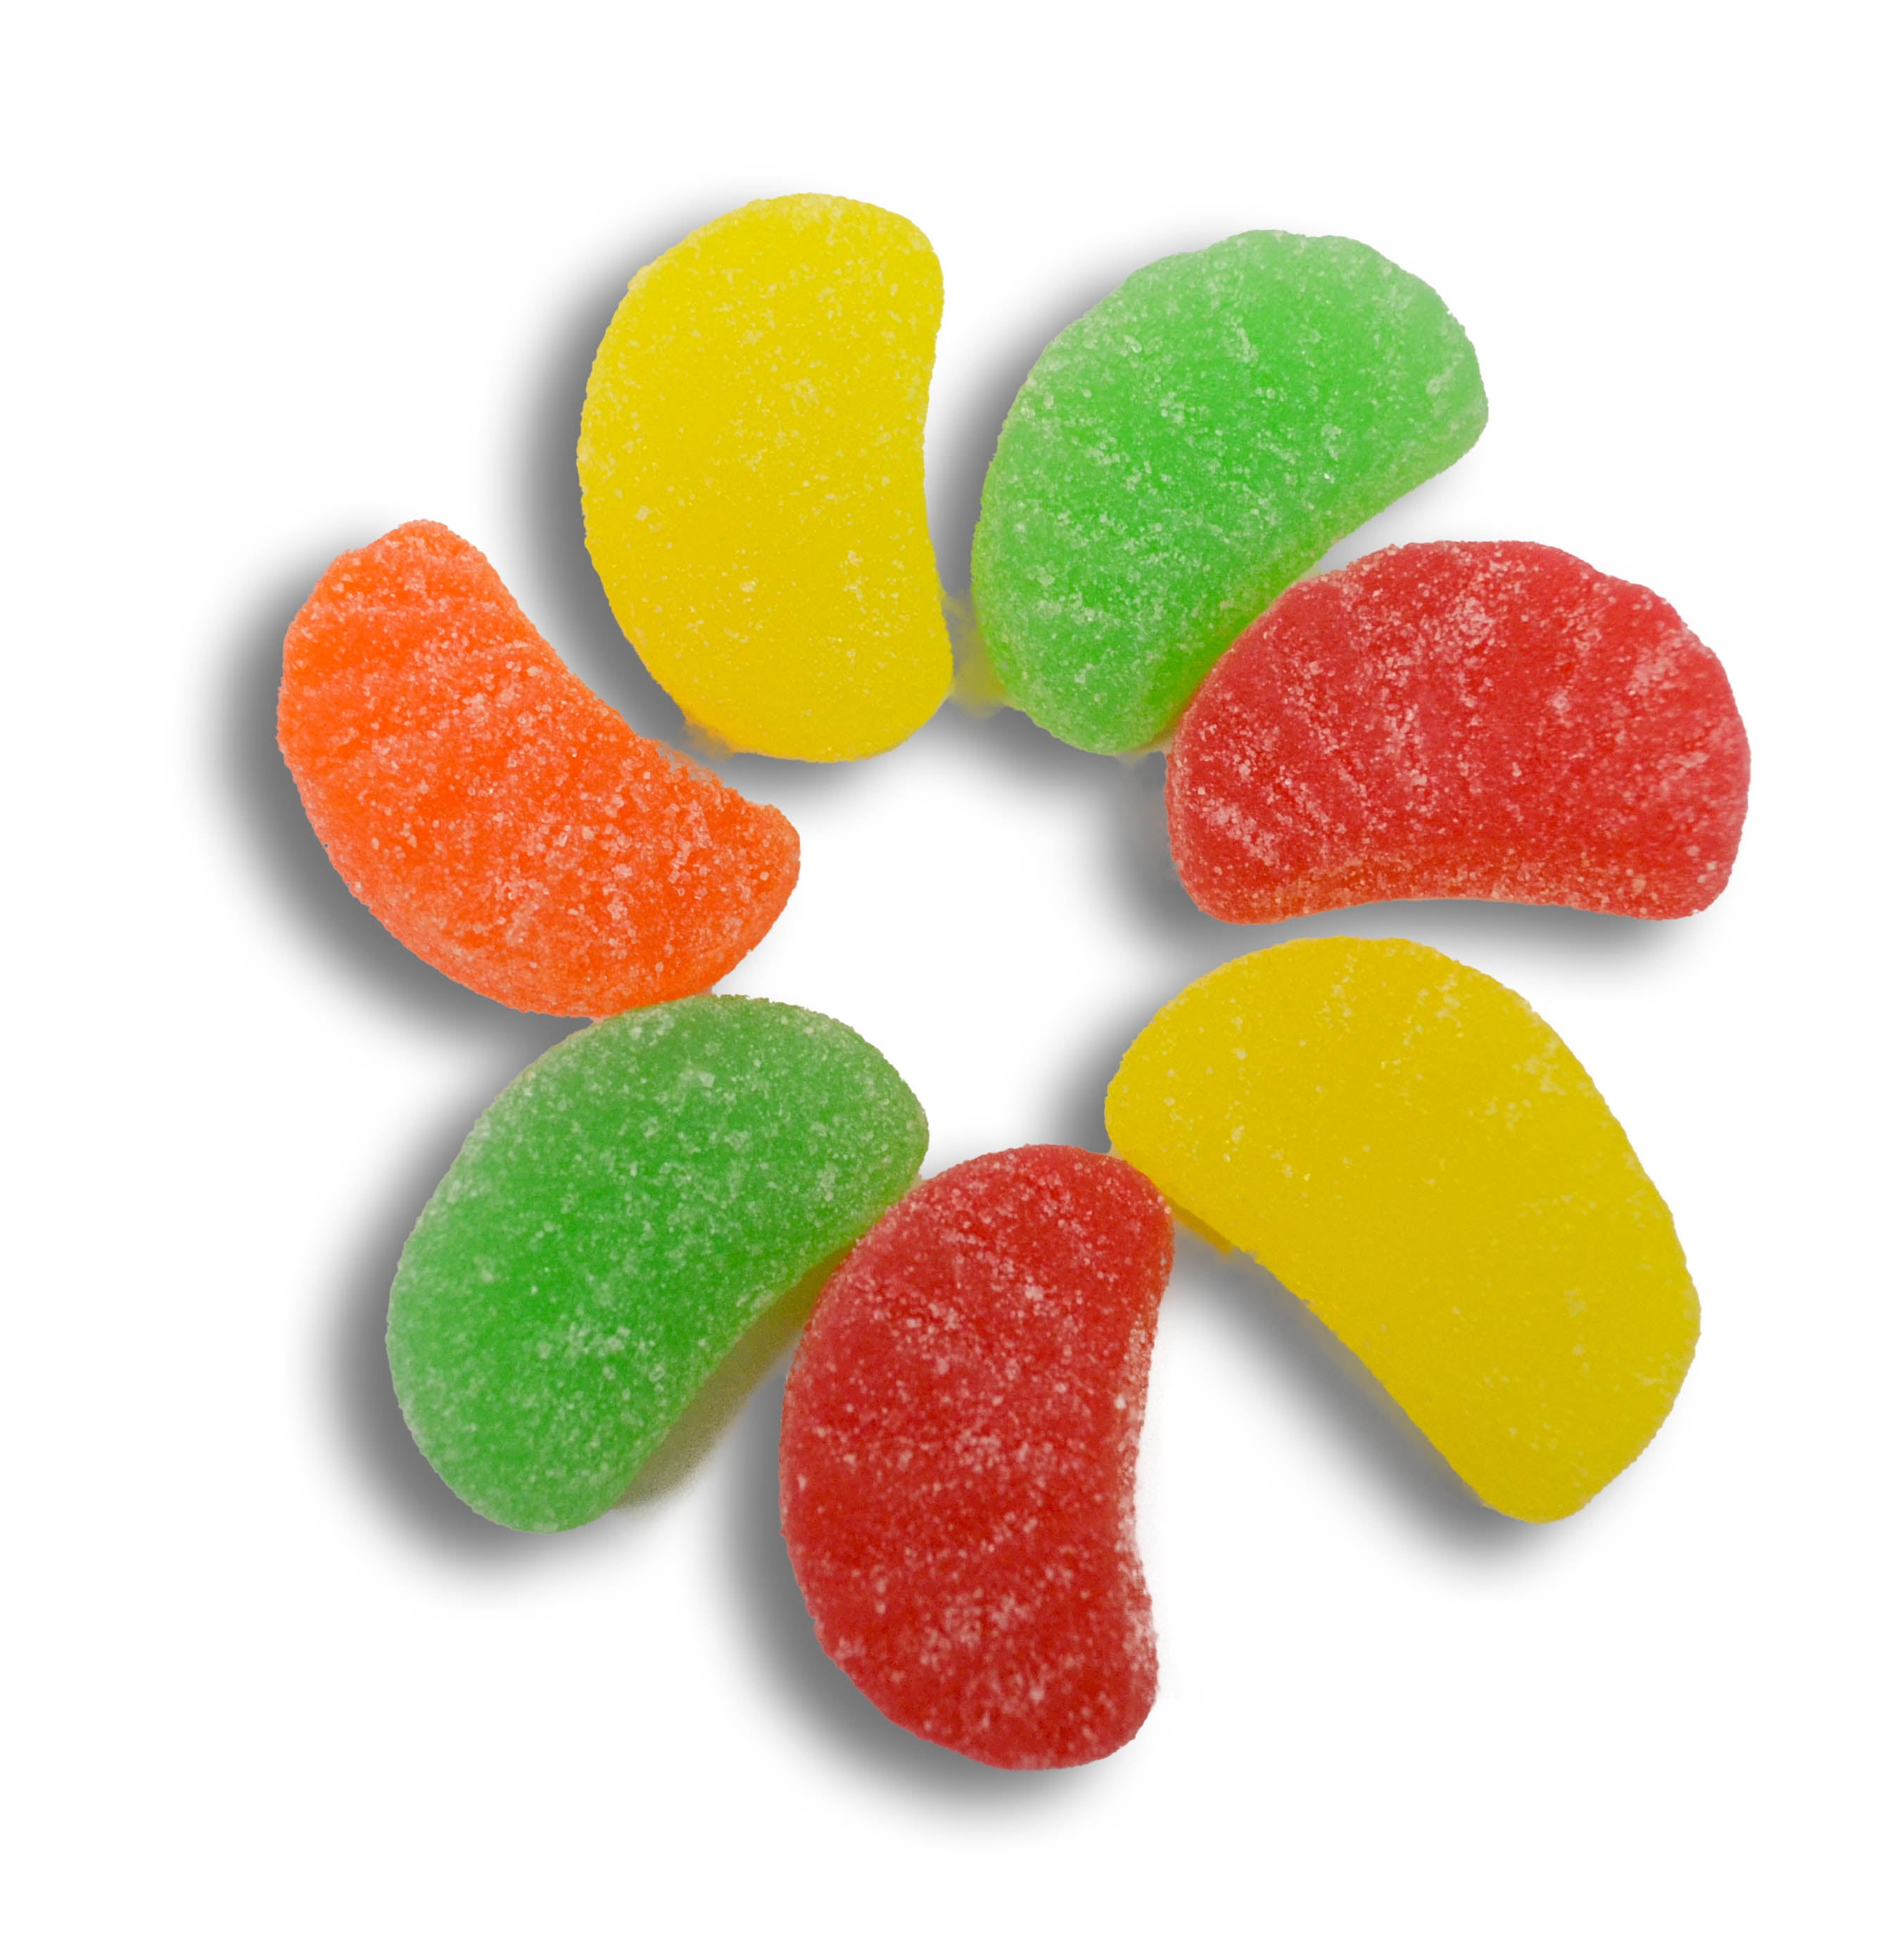 Assorted Fruit Slices Save on Product Fresh Fruit Slice Wedges Mixed Lemon,  Orange, Cherry, Lime Candy Delicious Sugar Coated Fruit Flavors Gummies